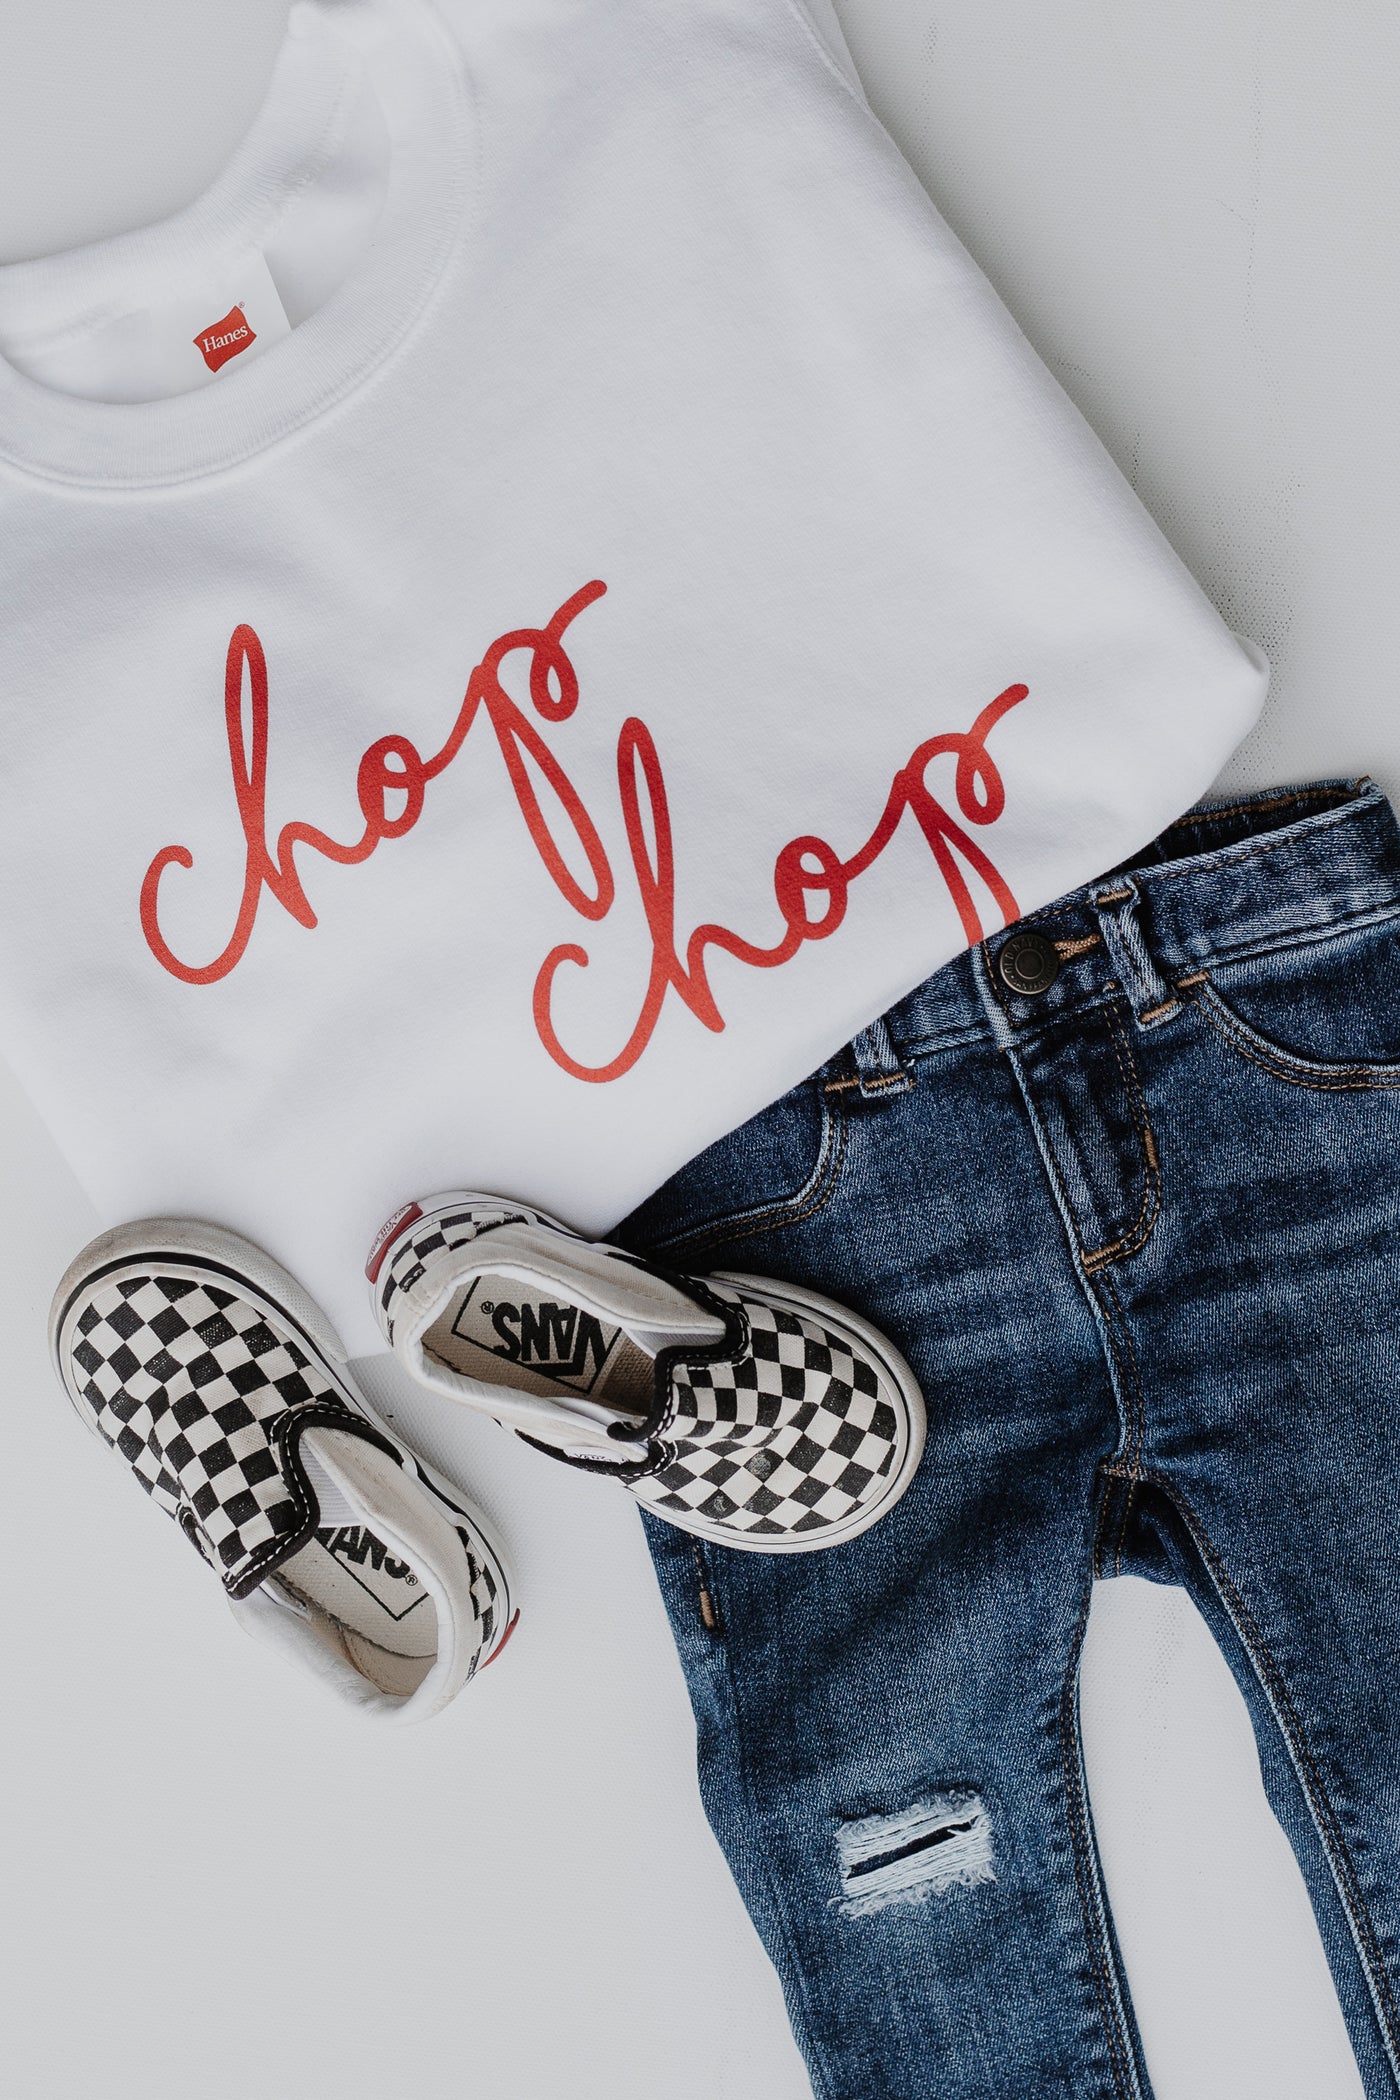 Youth Chop Chop Script Pullover from dress up